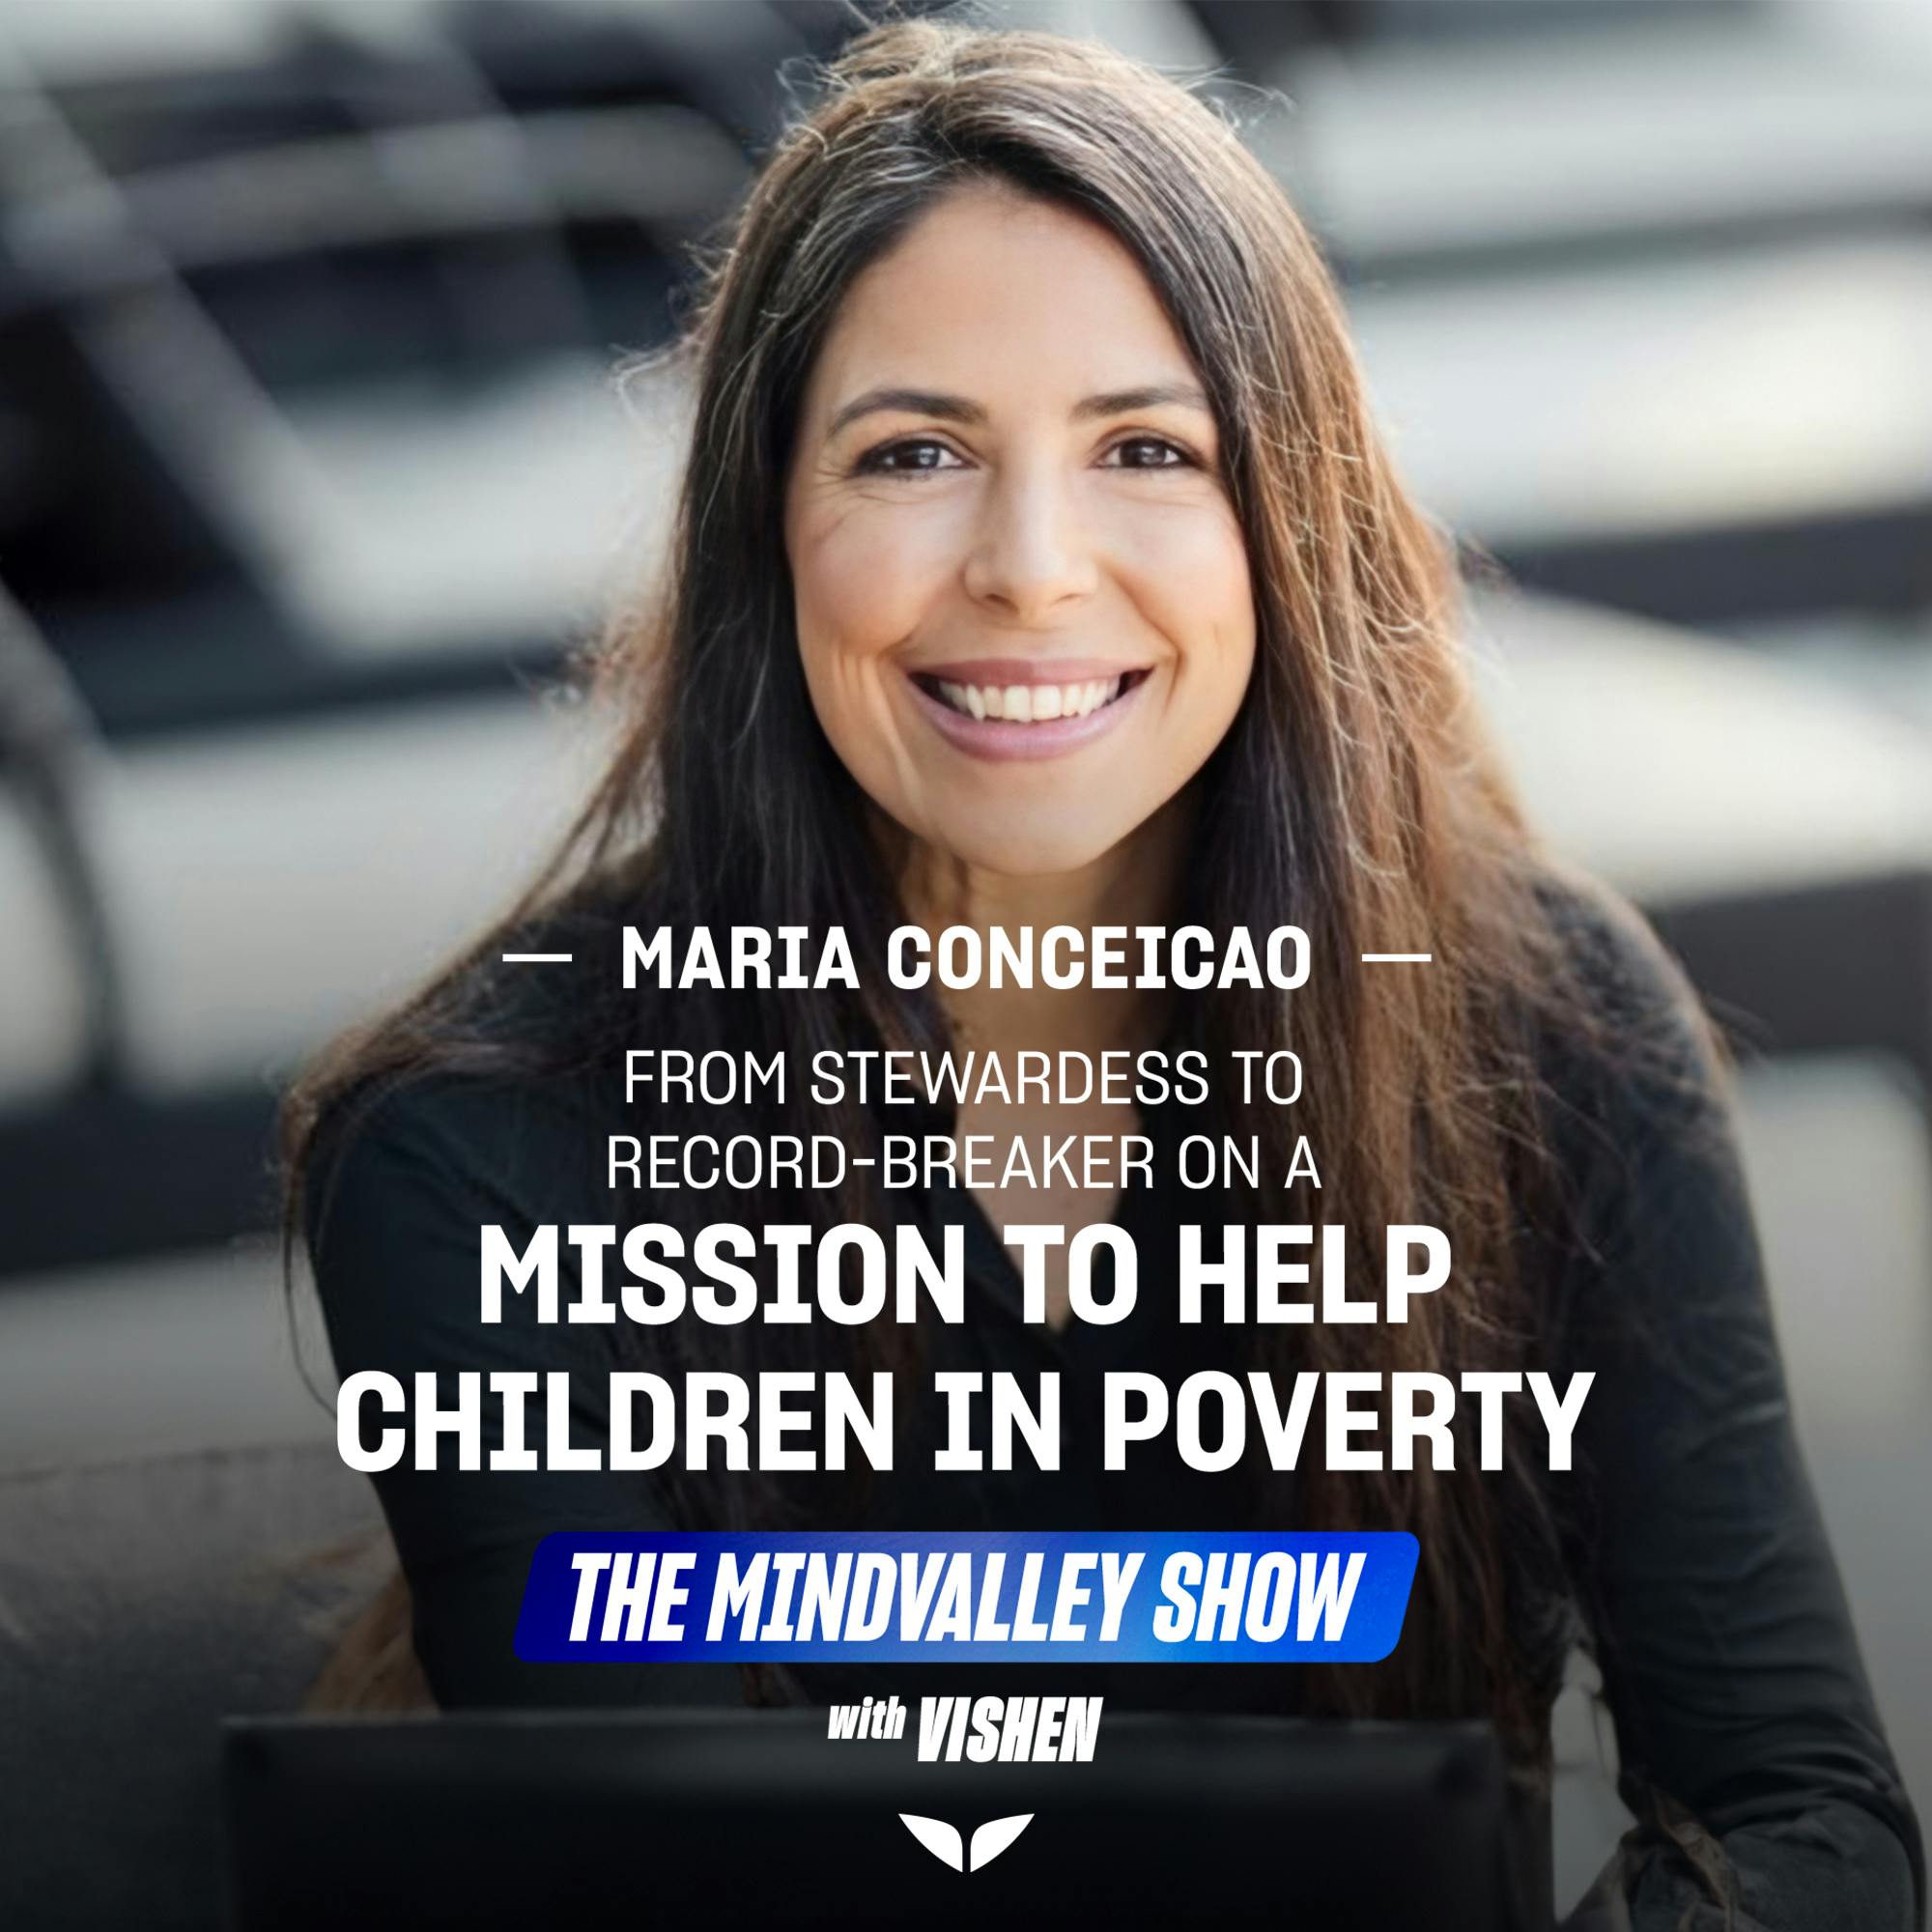 Maria Conceicao: From Stewardess to Record-Breaker on a Mission to Help Children in Poverty